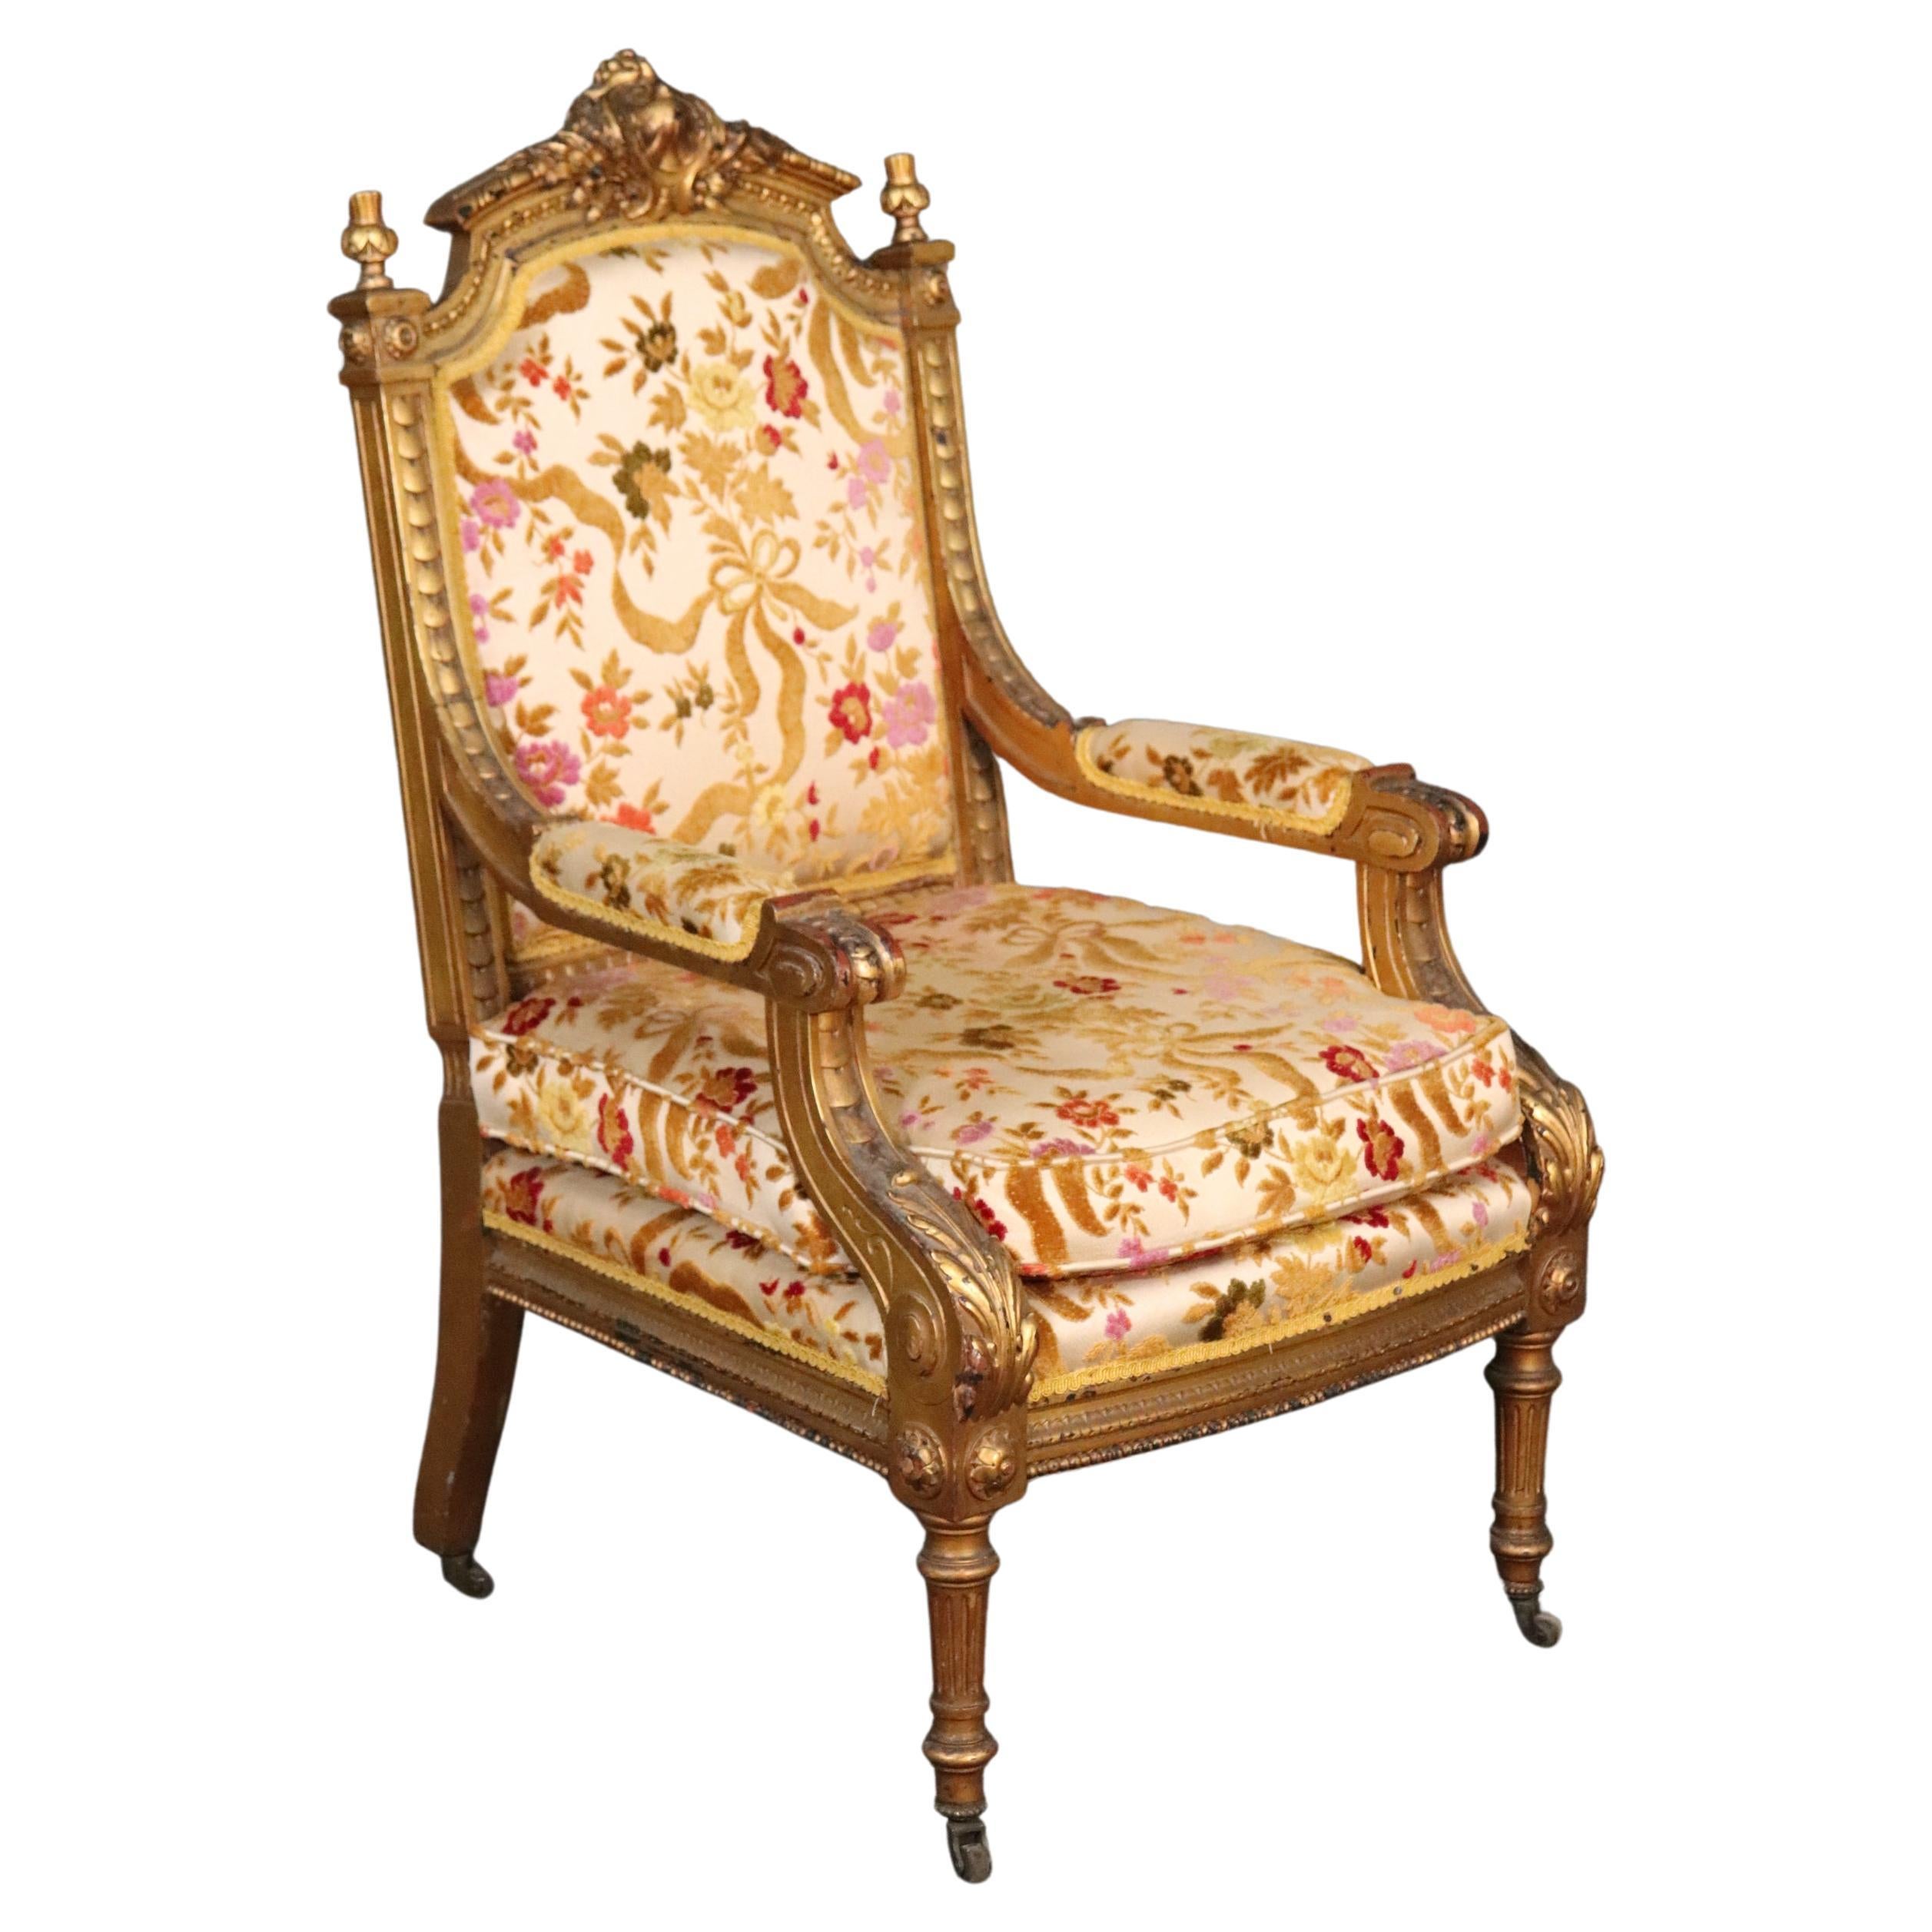 Luminous Gilded French Louis XVI Regal Looking Armchair Fauteuil For Sale